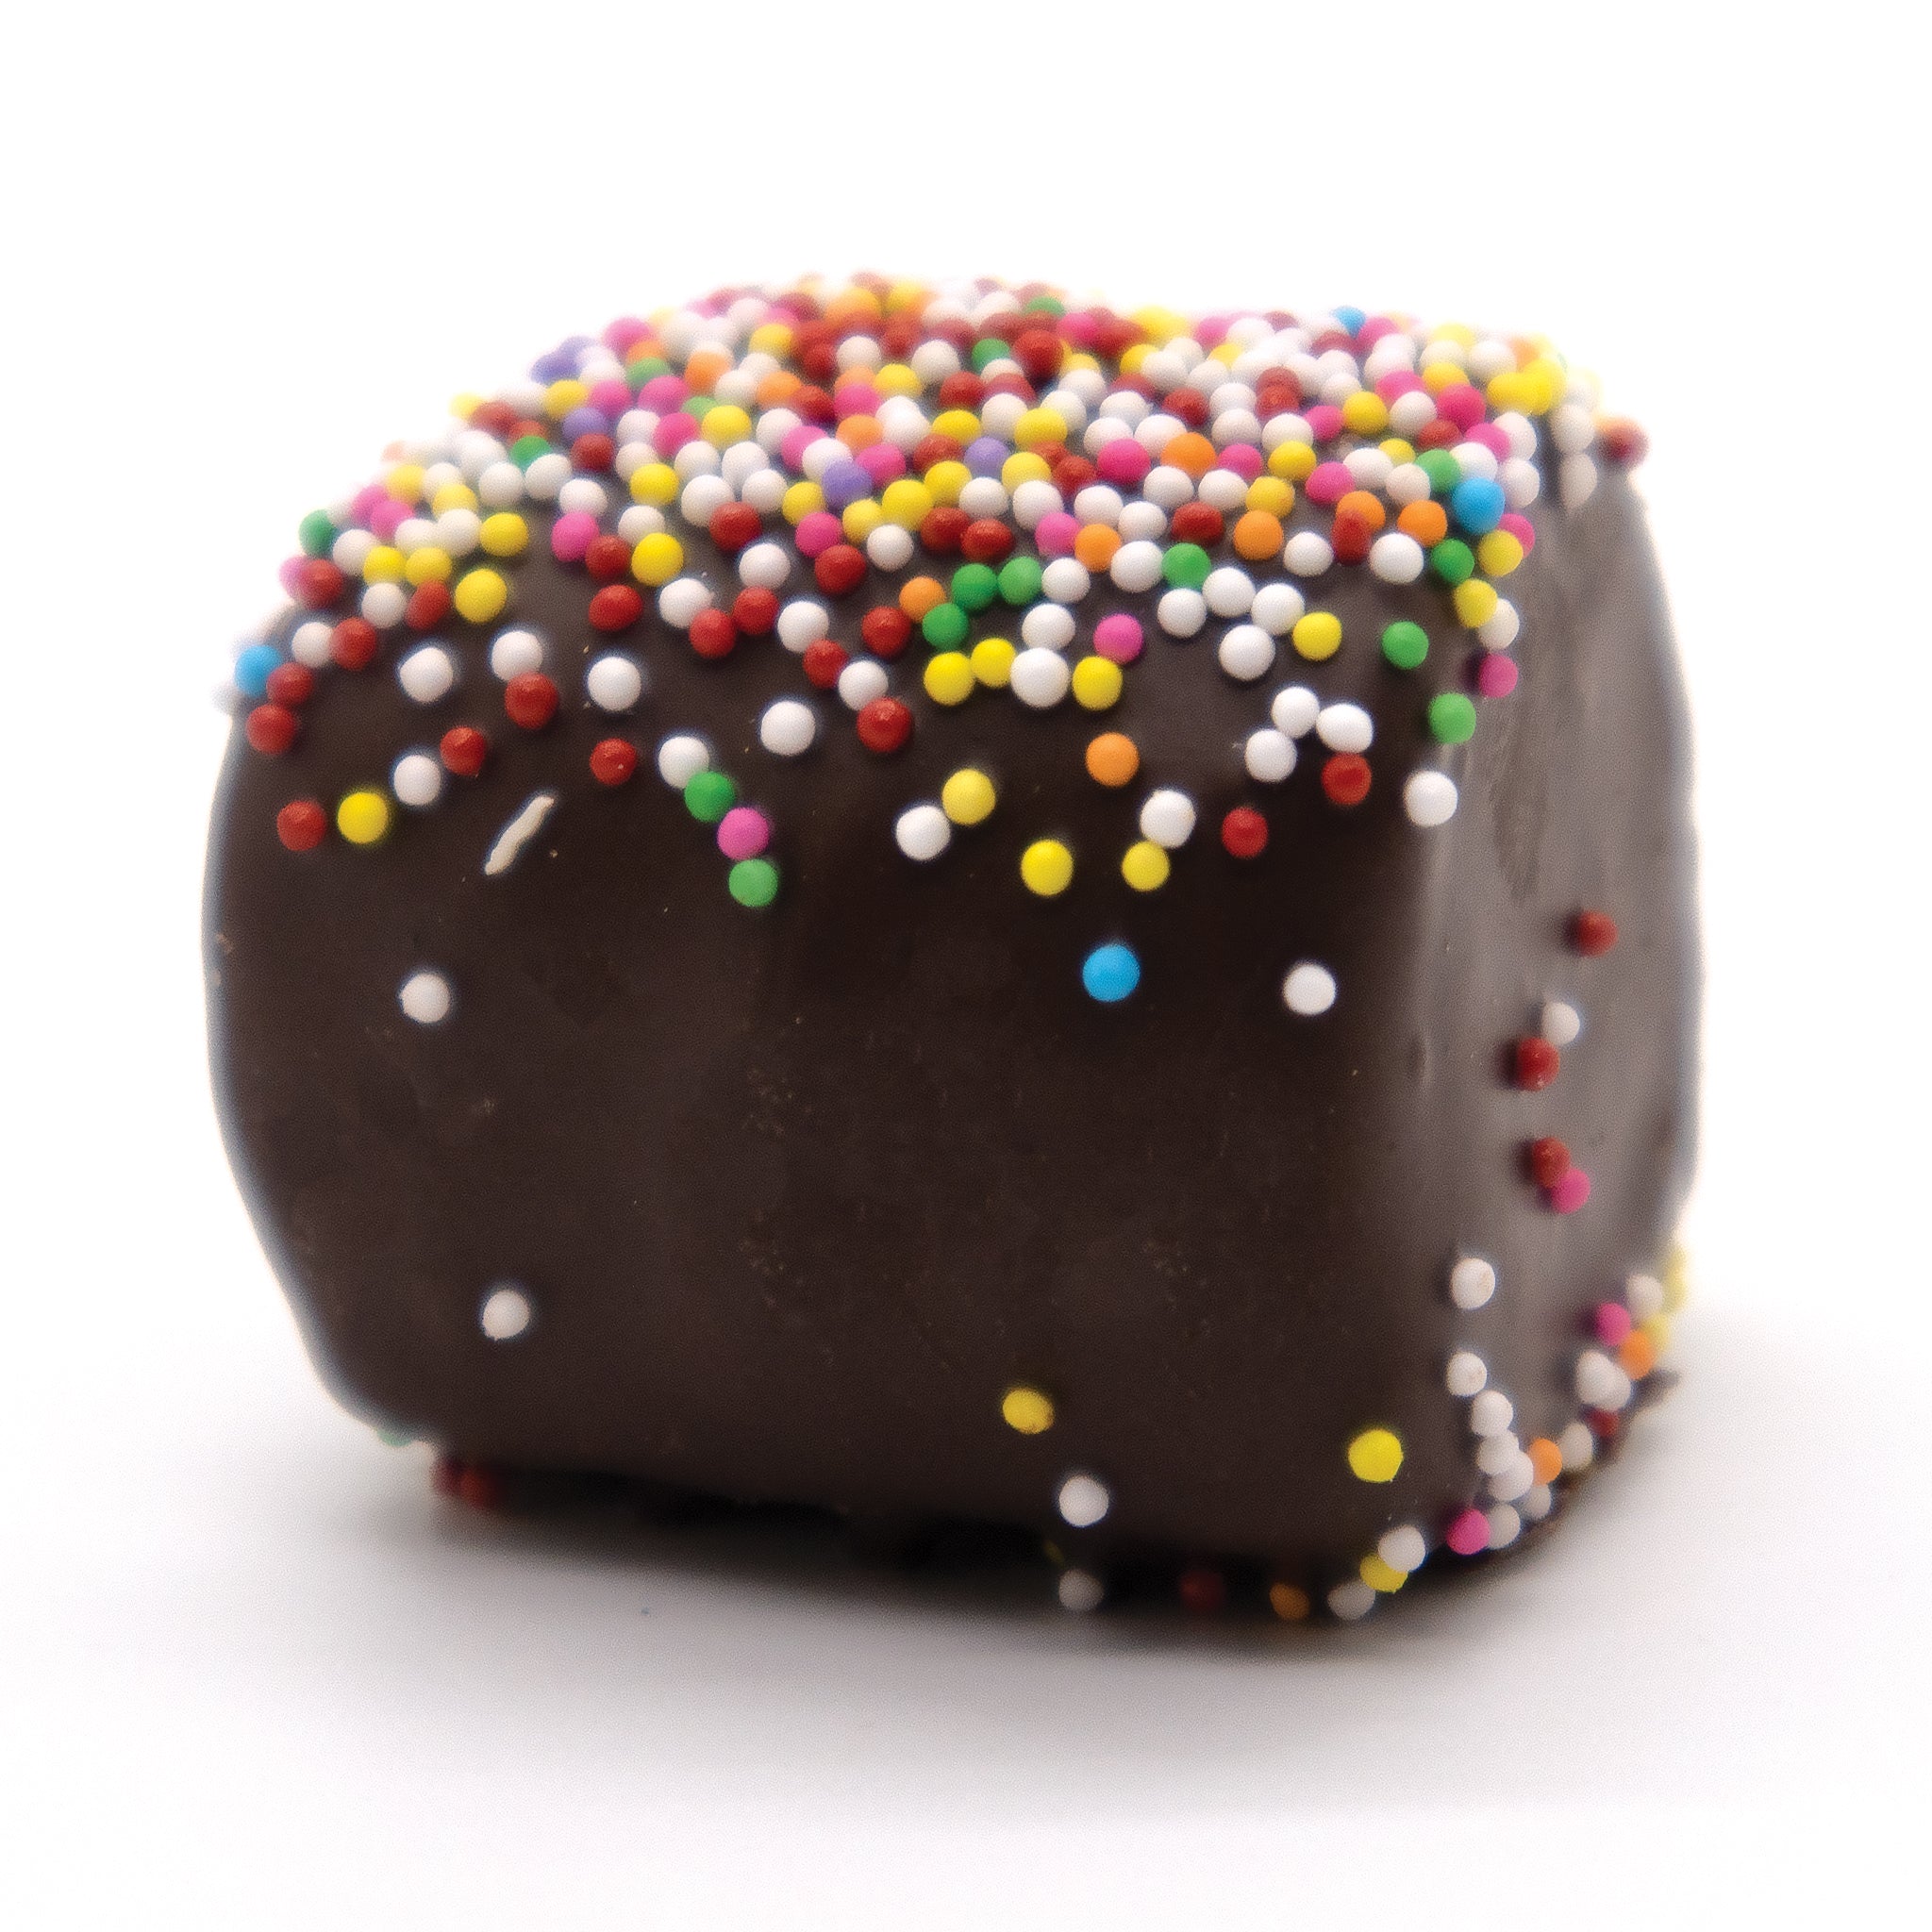 Chocolate Covered Big Mallow - Multi Seeds - 2 Lb.